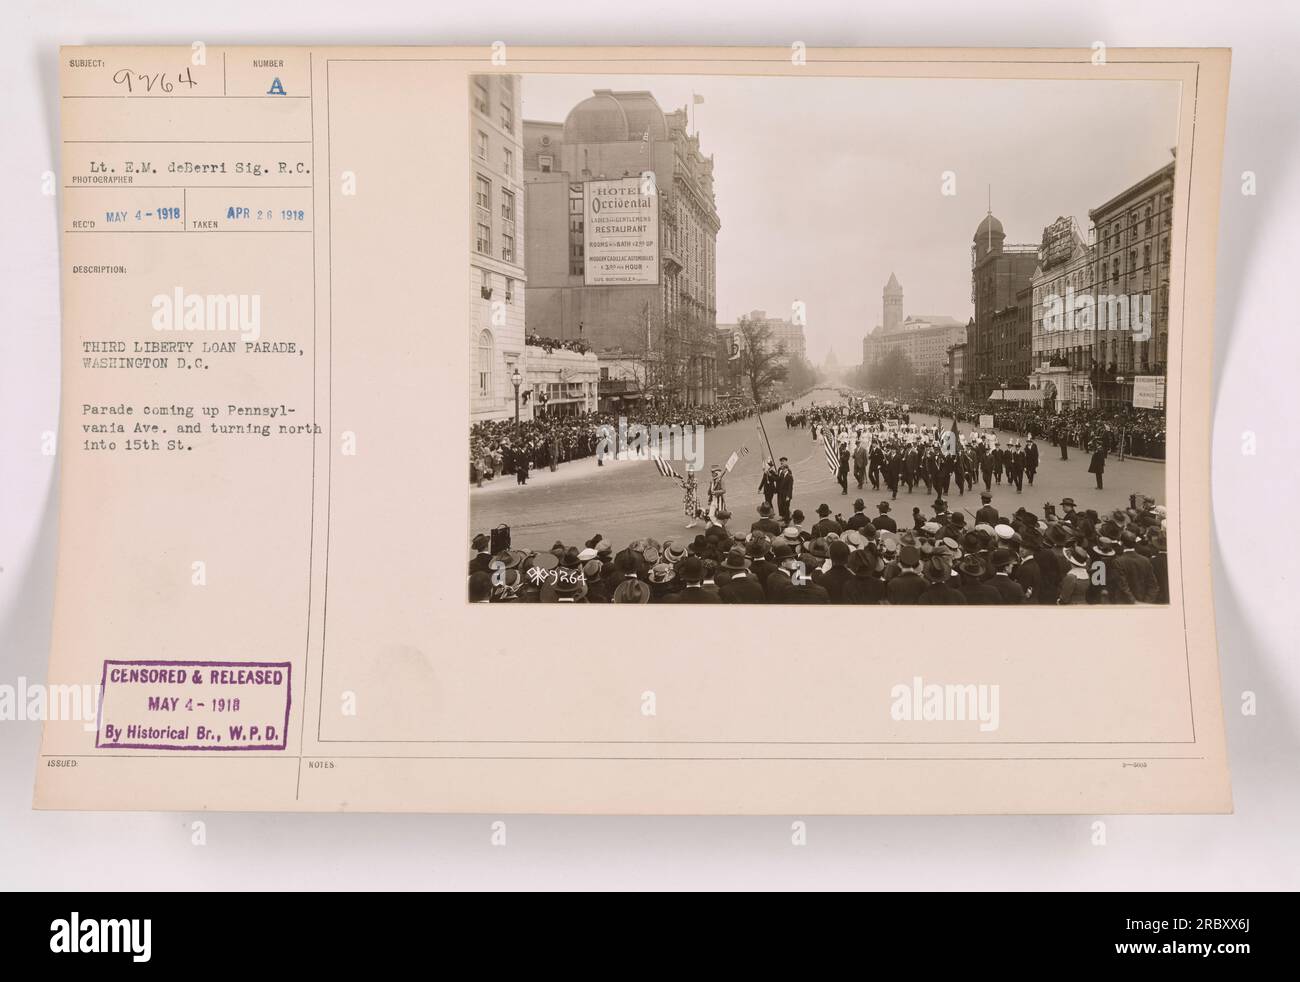 Image showing a parade during the Third Liberty Loan campaign in Washington D.C. on April 24, 1918. The parade is seen approaching Pennsylvania Ave and turning north into 15th St. This photograph was censored and released on May 4, 1918, by the Historical Branch of the War Plans Division. Stock Photo